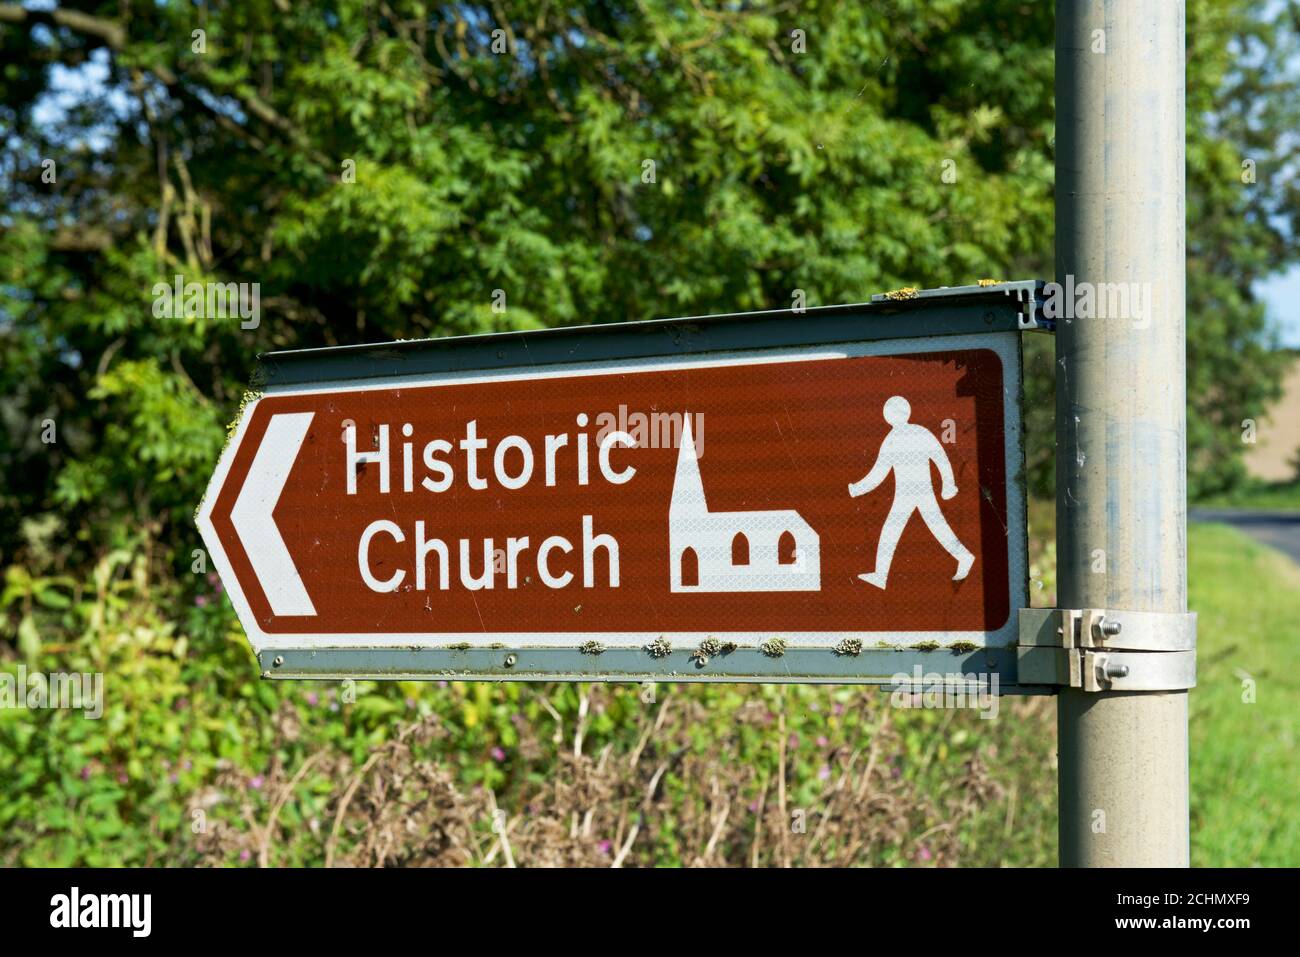 Direction sign for Historic Church, England UK Stock Photo